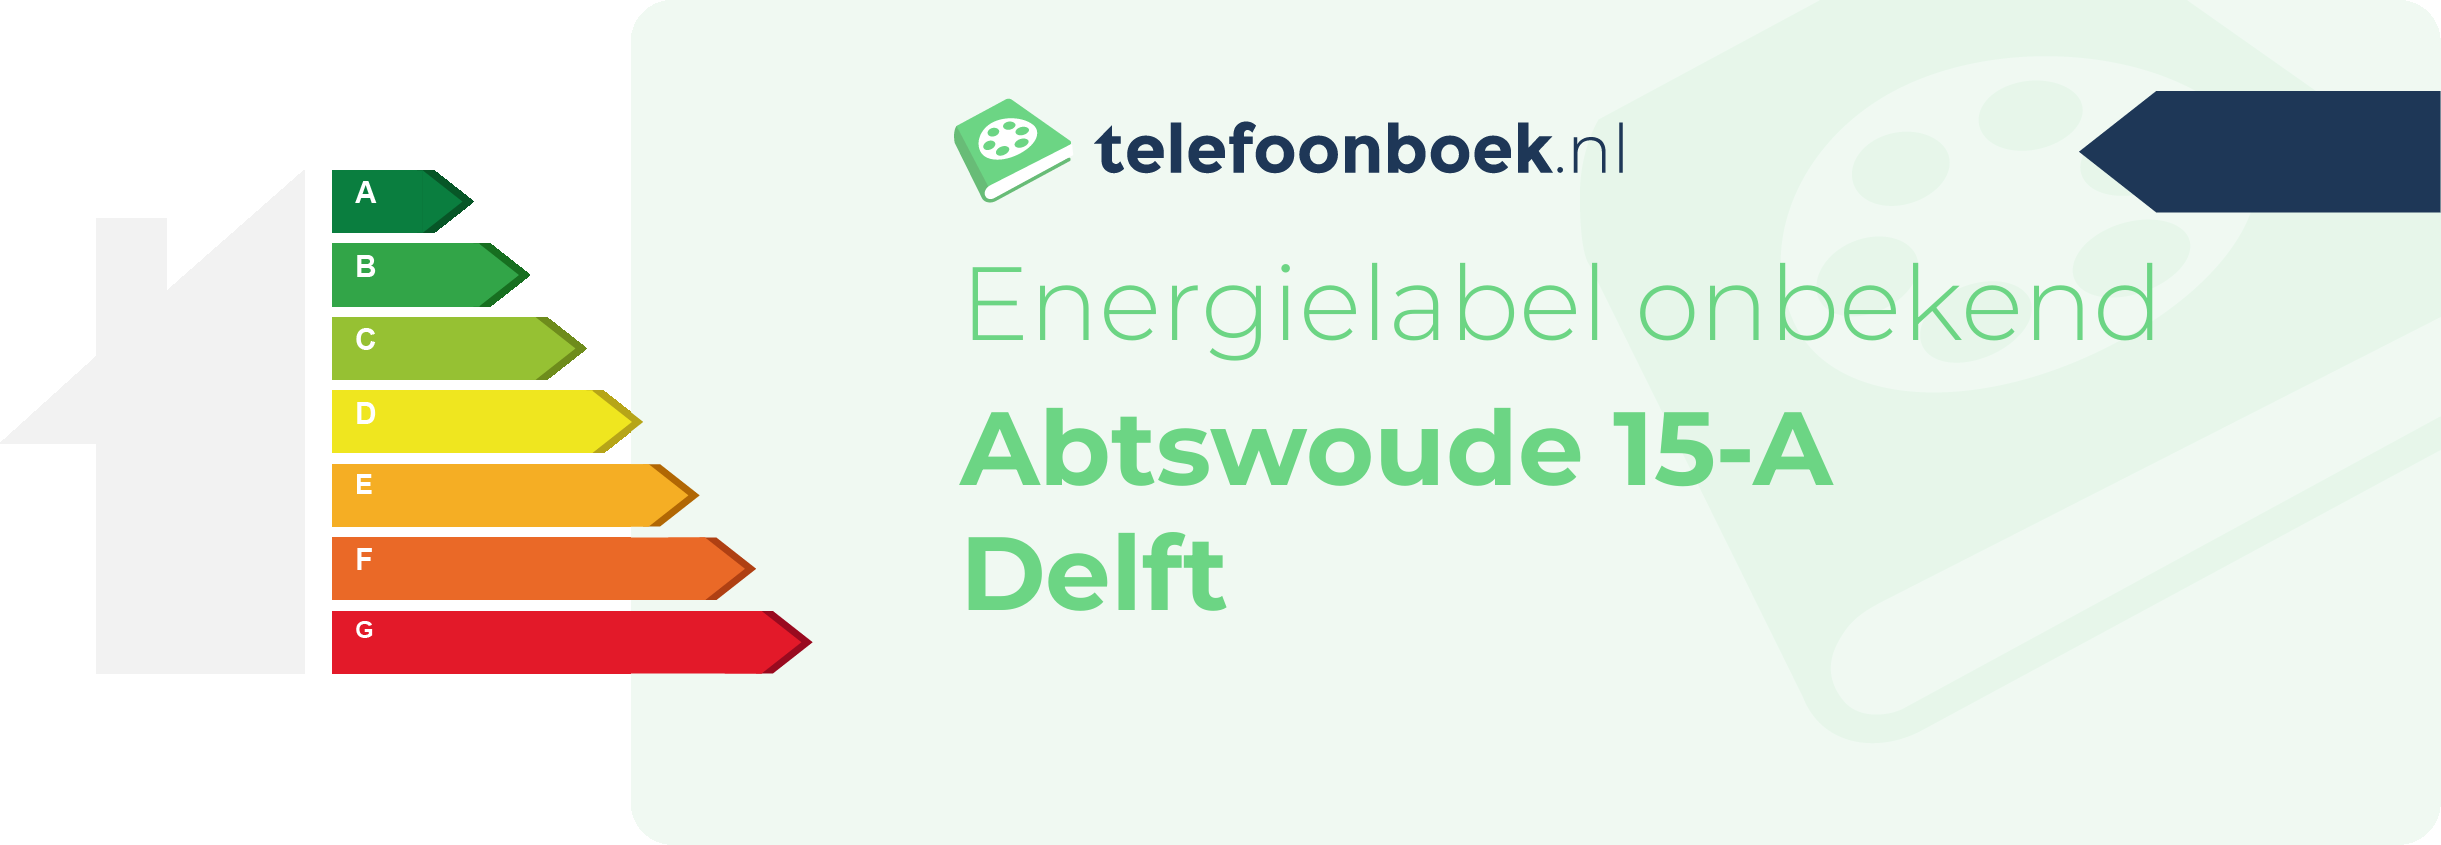 Energielabel Abtswoude 15-A Delft